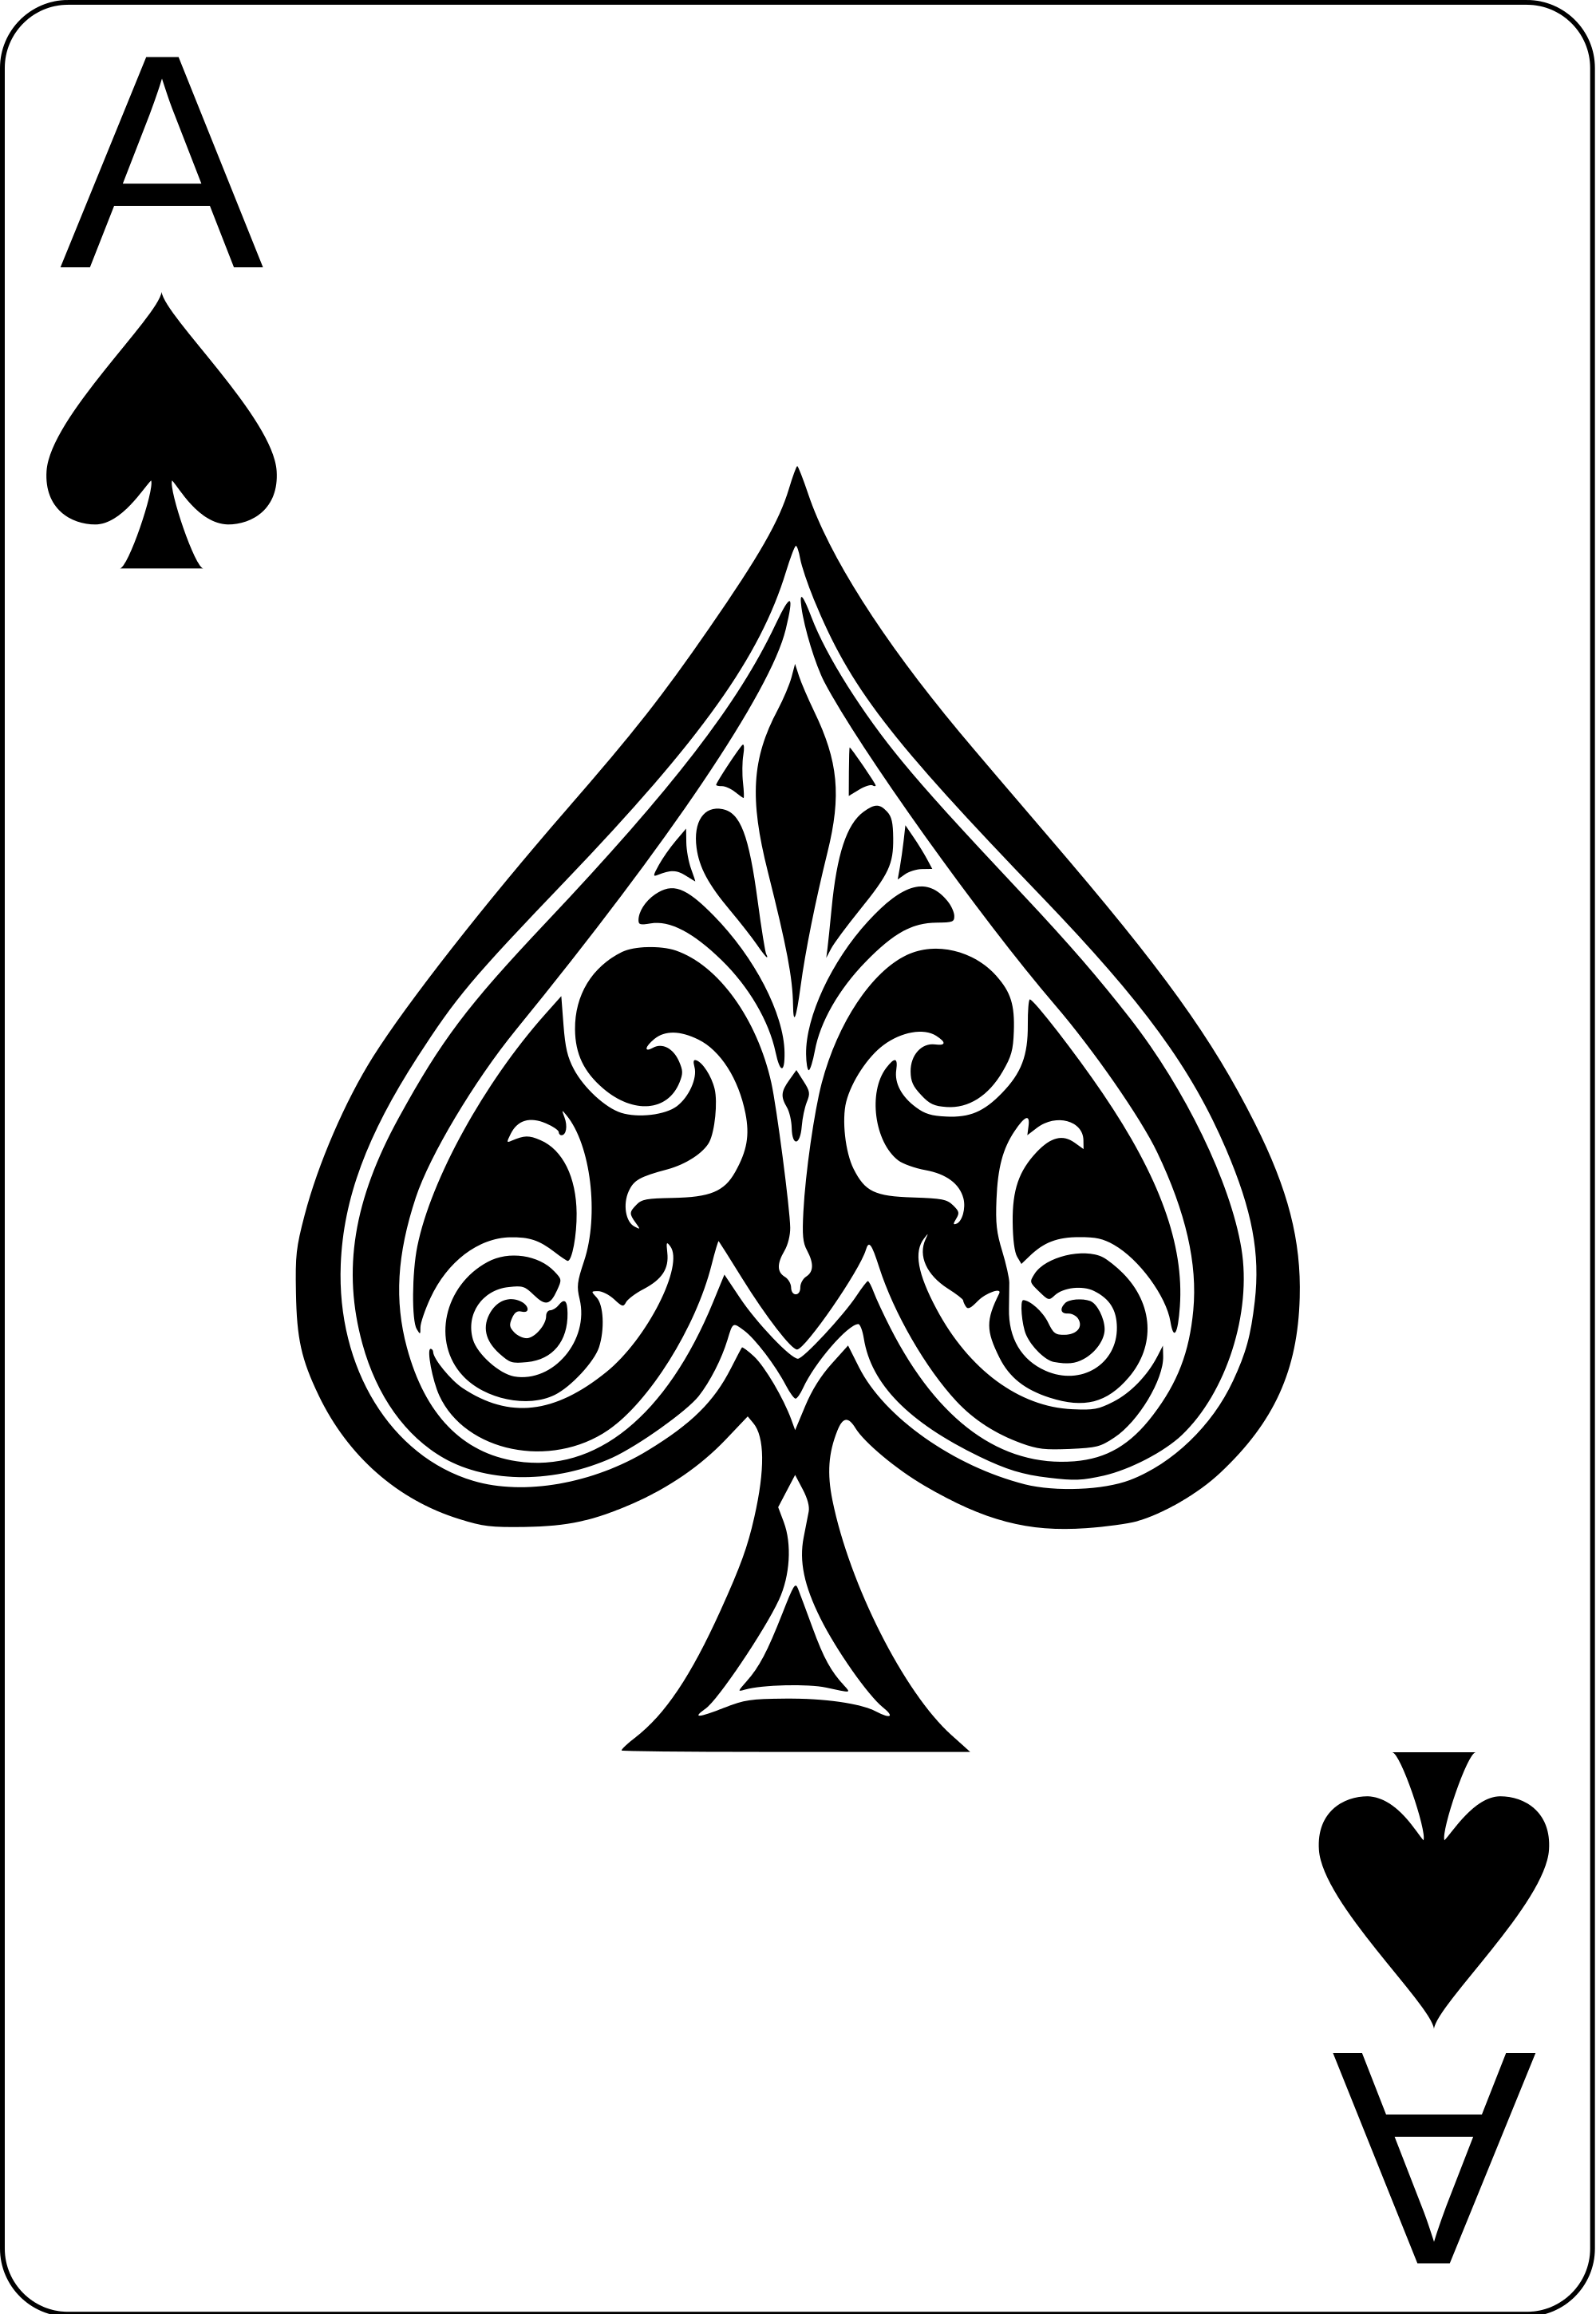 Ace_of_spades.svg_.png